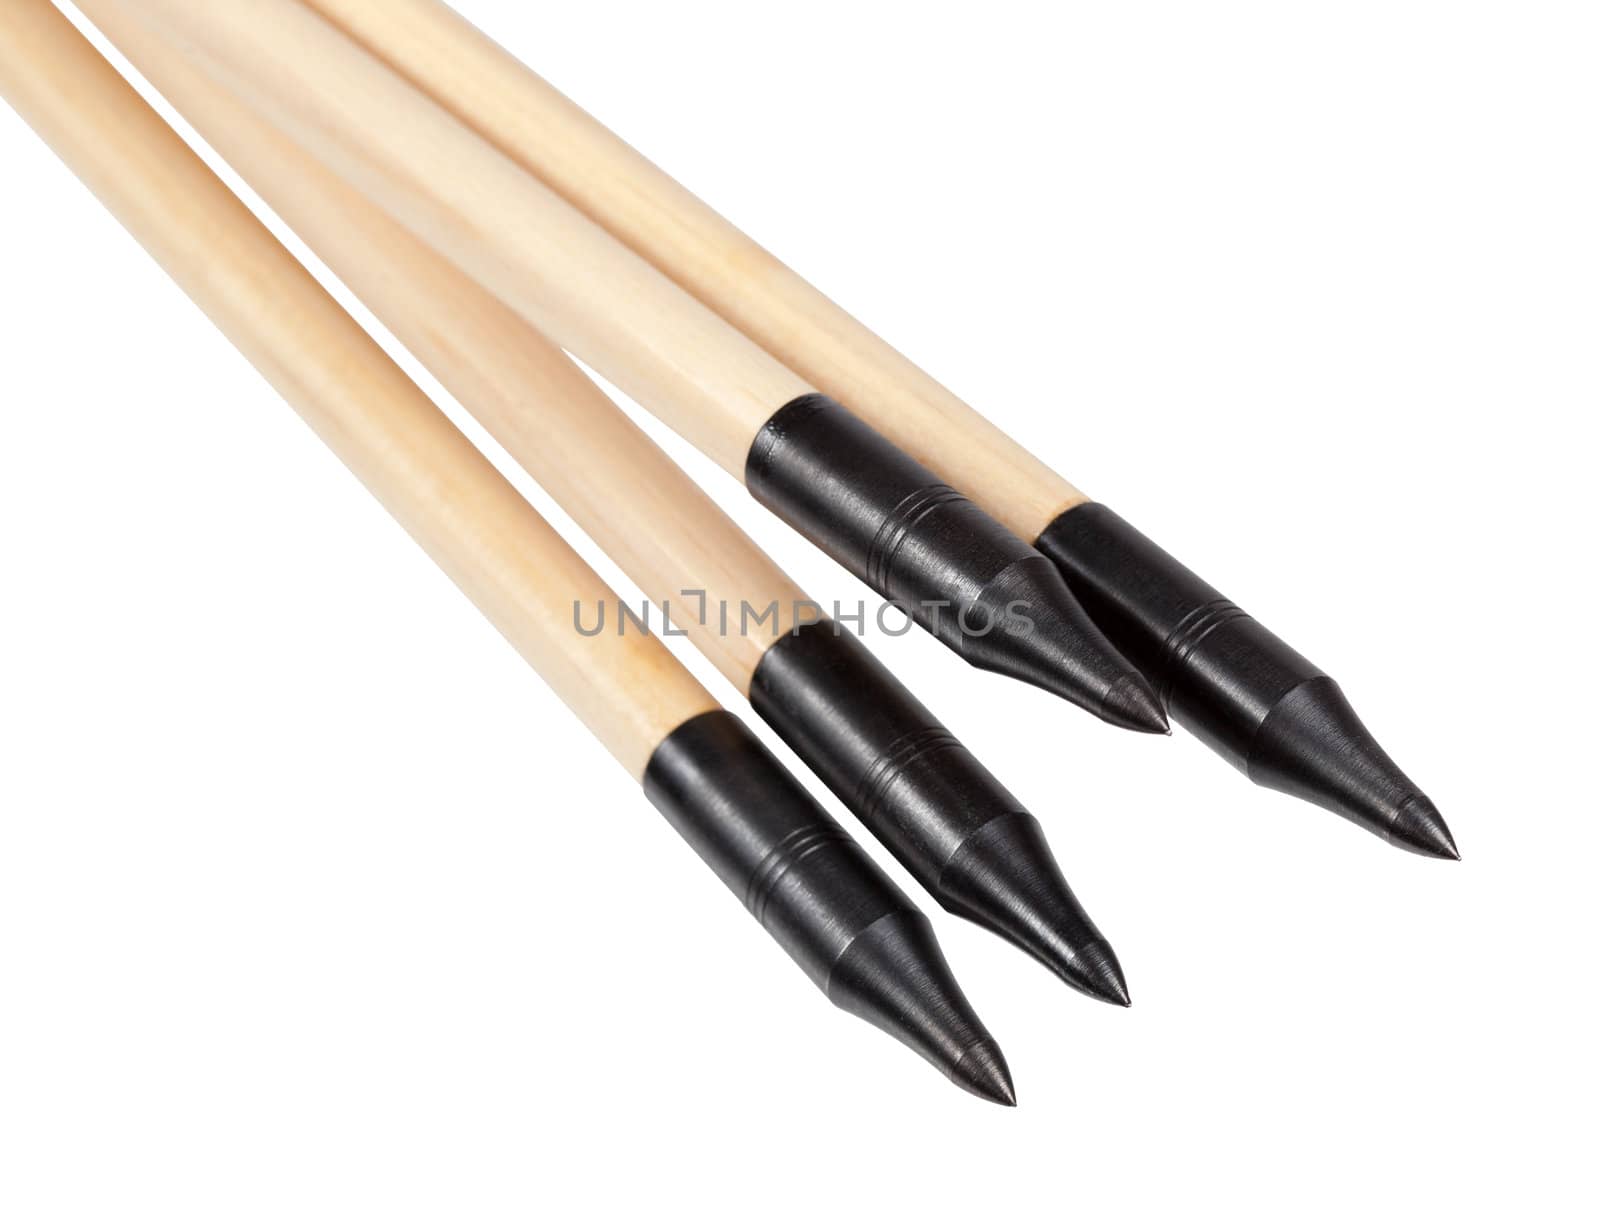 A set of arrows made of wood with metal tips isolated on a white background